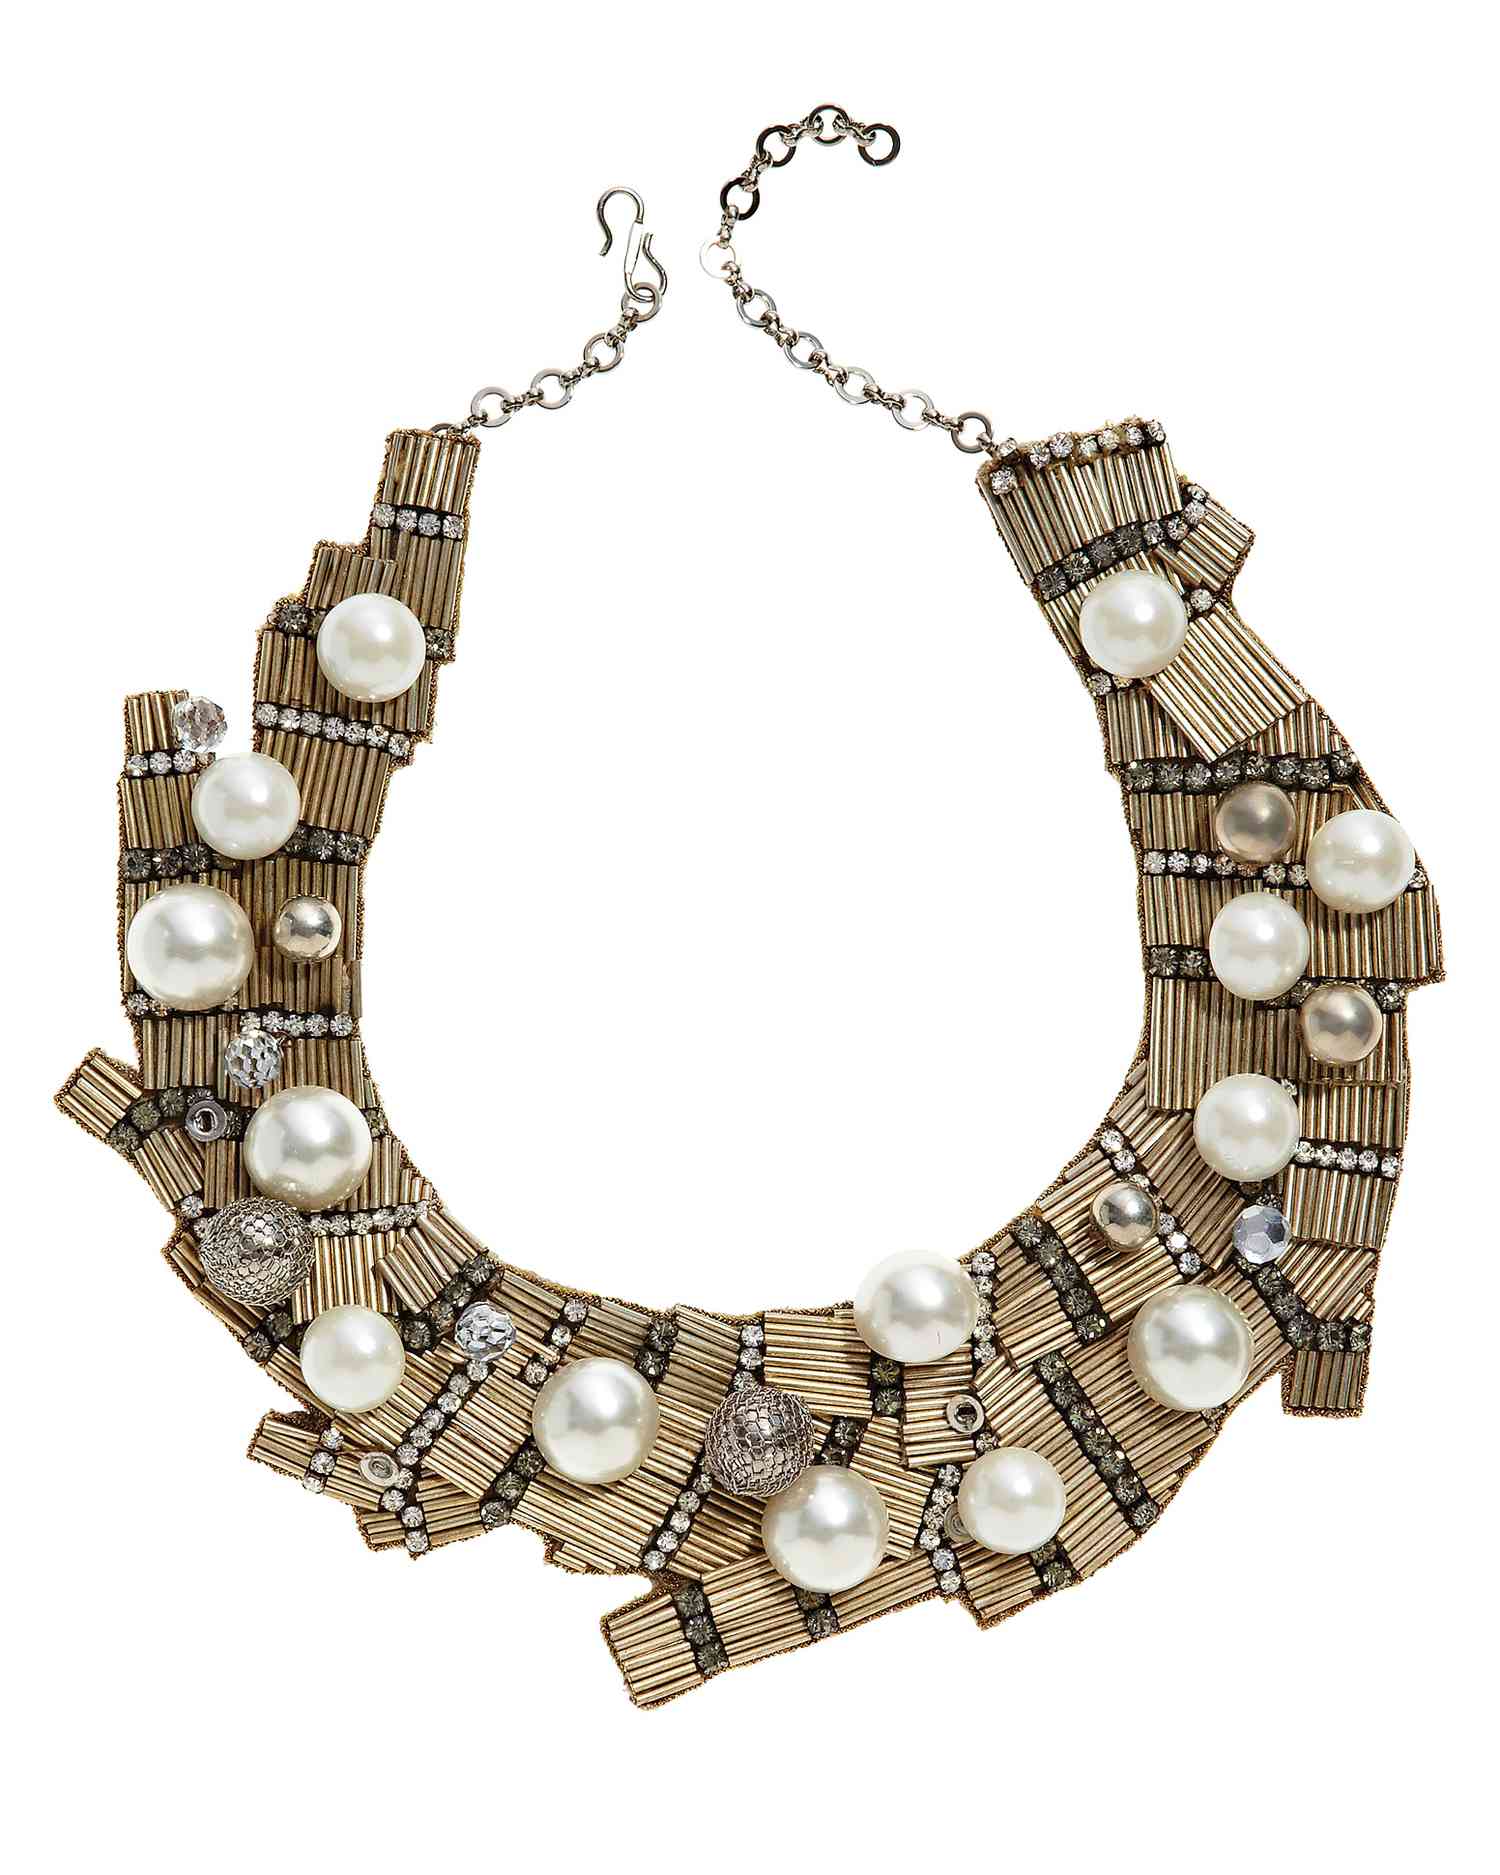 Necklace with Gold Beads